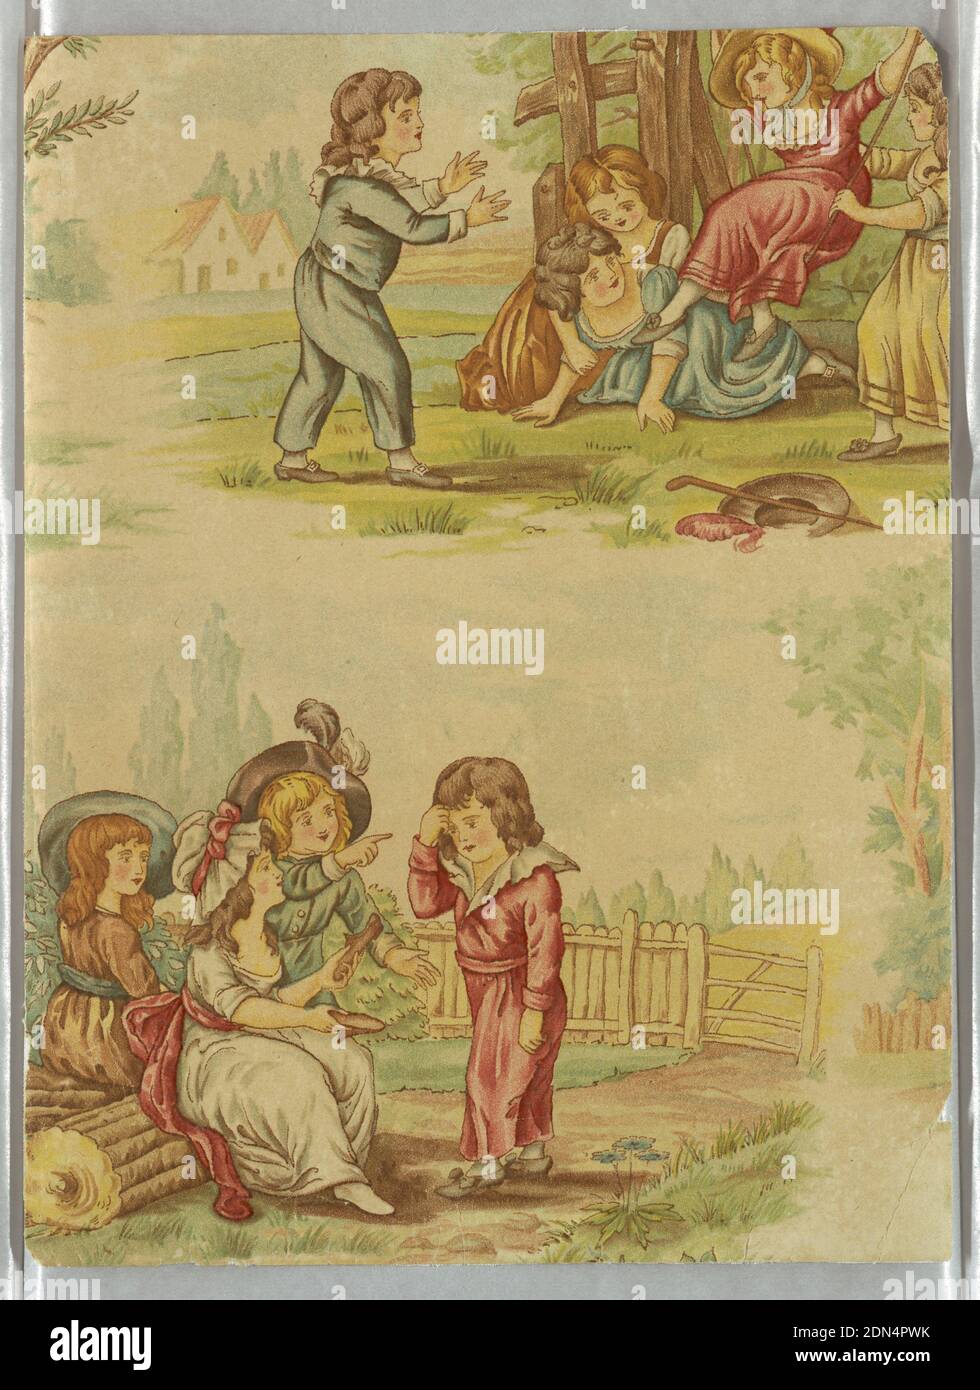 Sidewall, Intaglio printed, Vertical rectangle, with portion of two groups of playing children dressed in the style of the late 18th century, with landscape settings. Upper right, children at a swing; lower left, children seated in a garden. Intaglio-printed in colors., possibly USA, ca. 1885, Wallcoverings, Sidewall Stock Photo